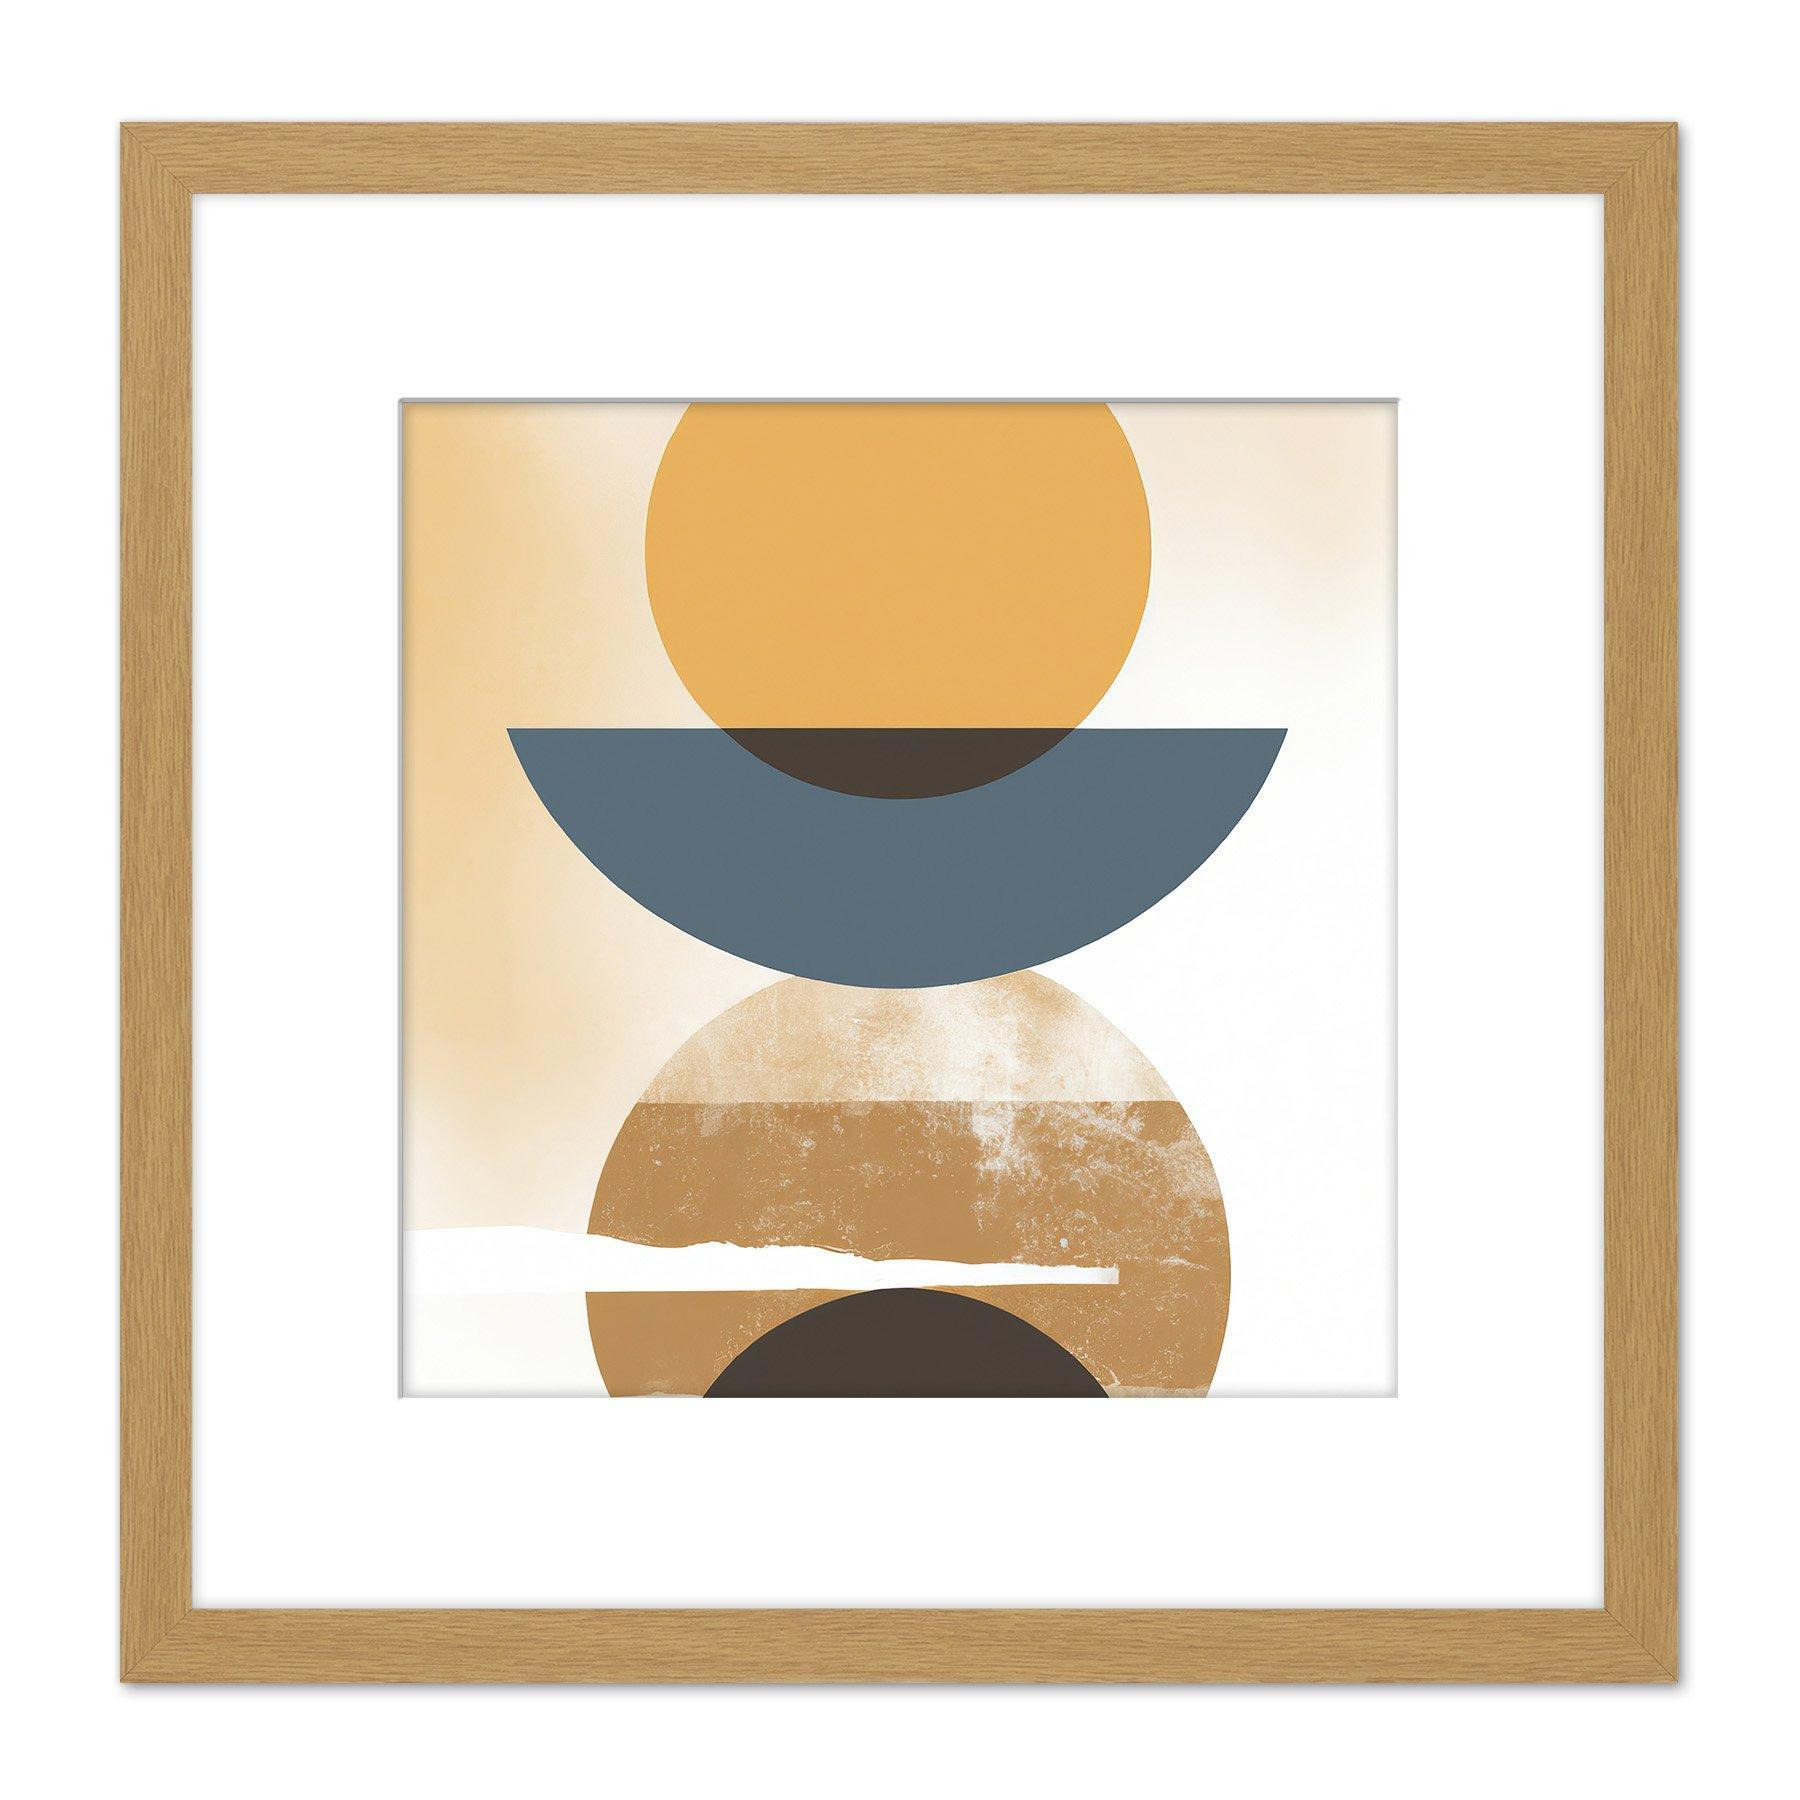 Sun Moon Eclipse Abstract Modern Simple Boho Bohemian Ochre Grey Square Wooden Framed Wall Art Print Picture 8X8 Inch - image 1